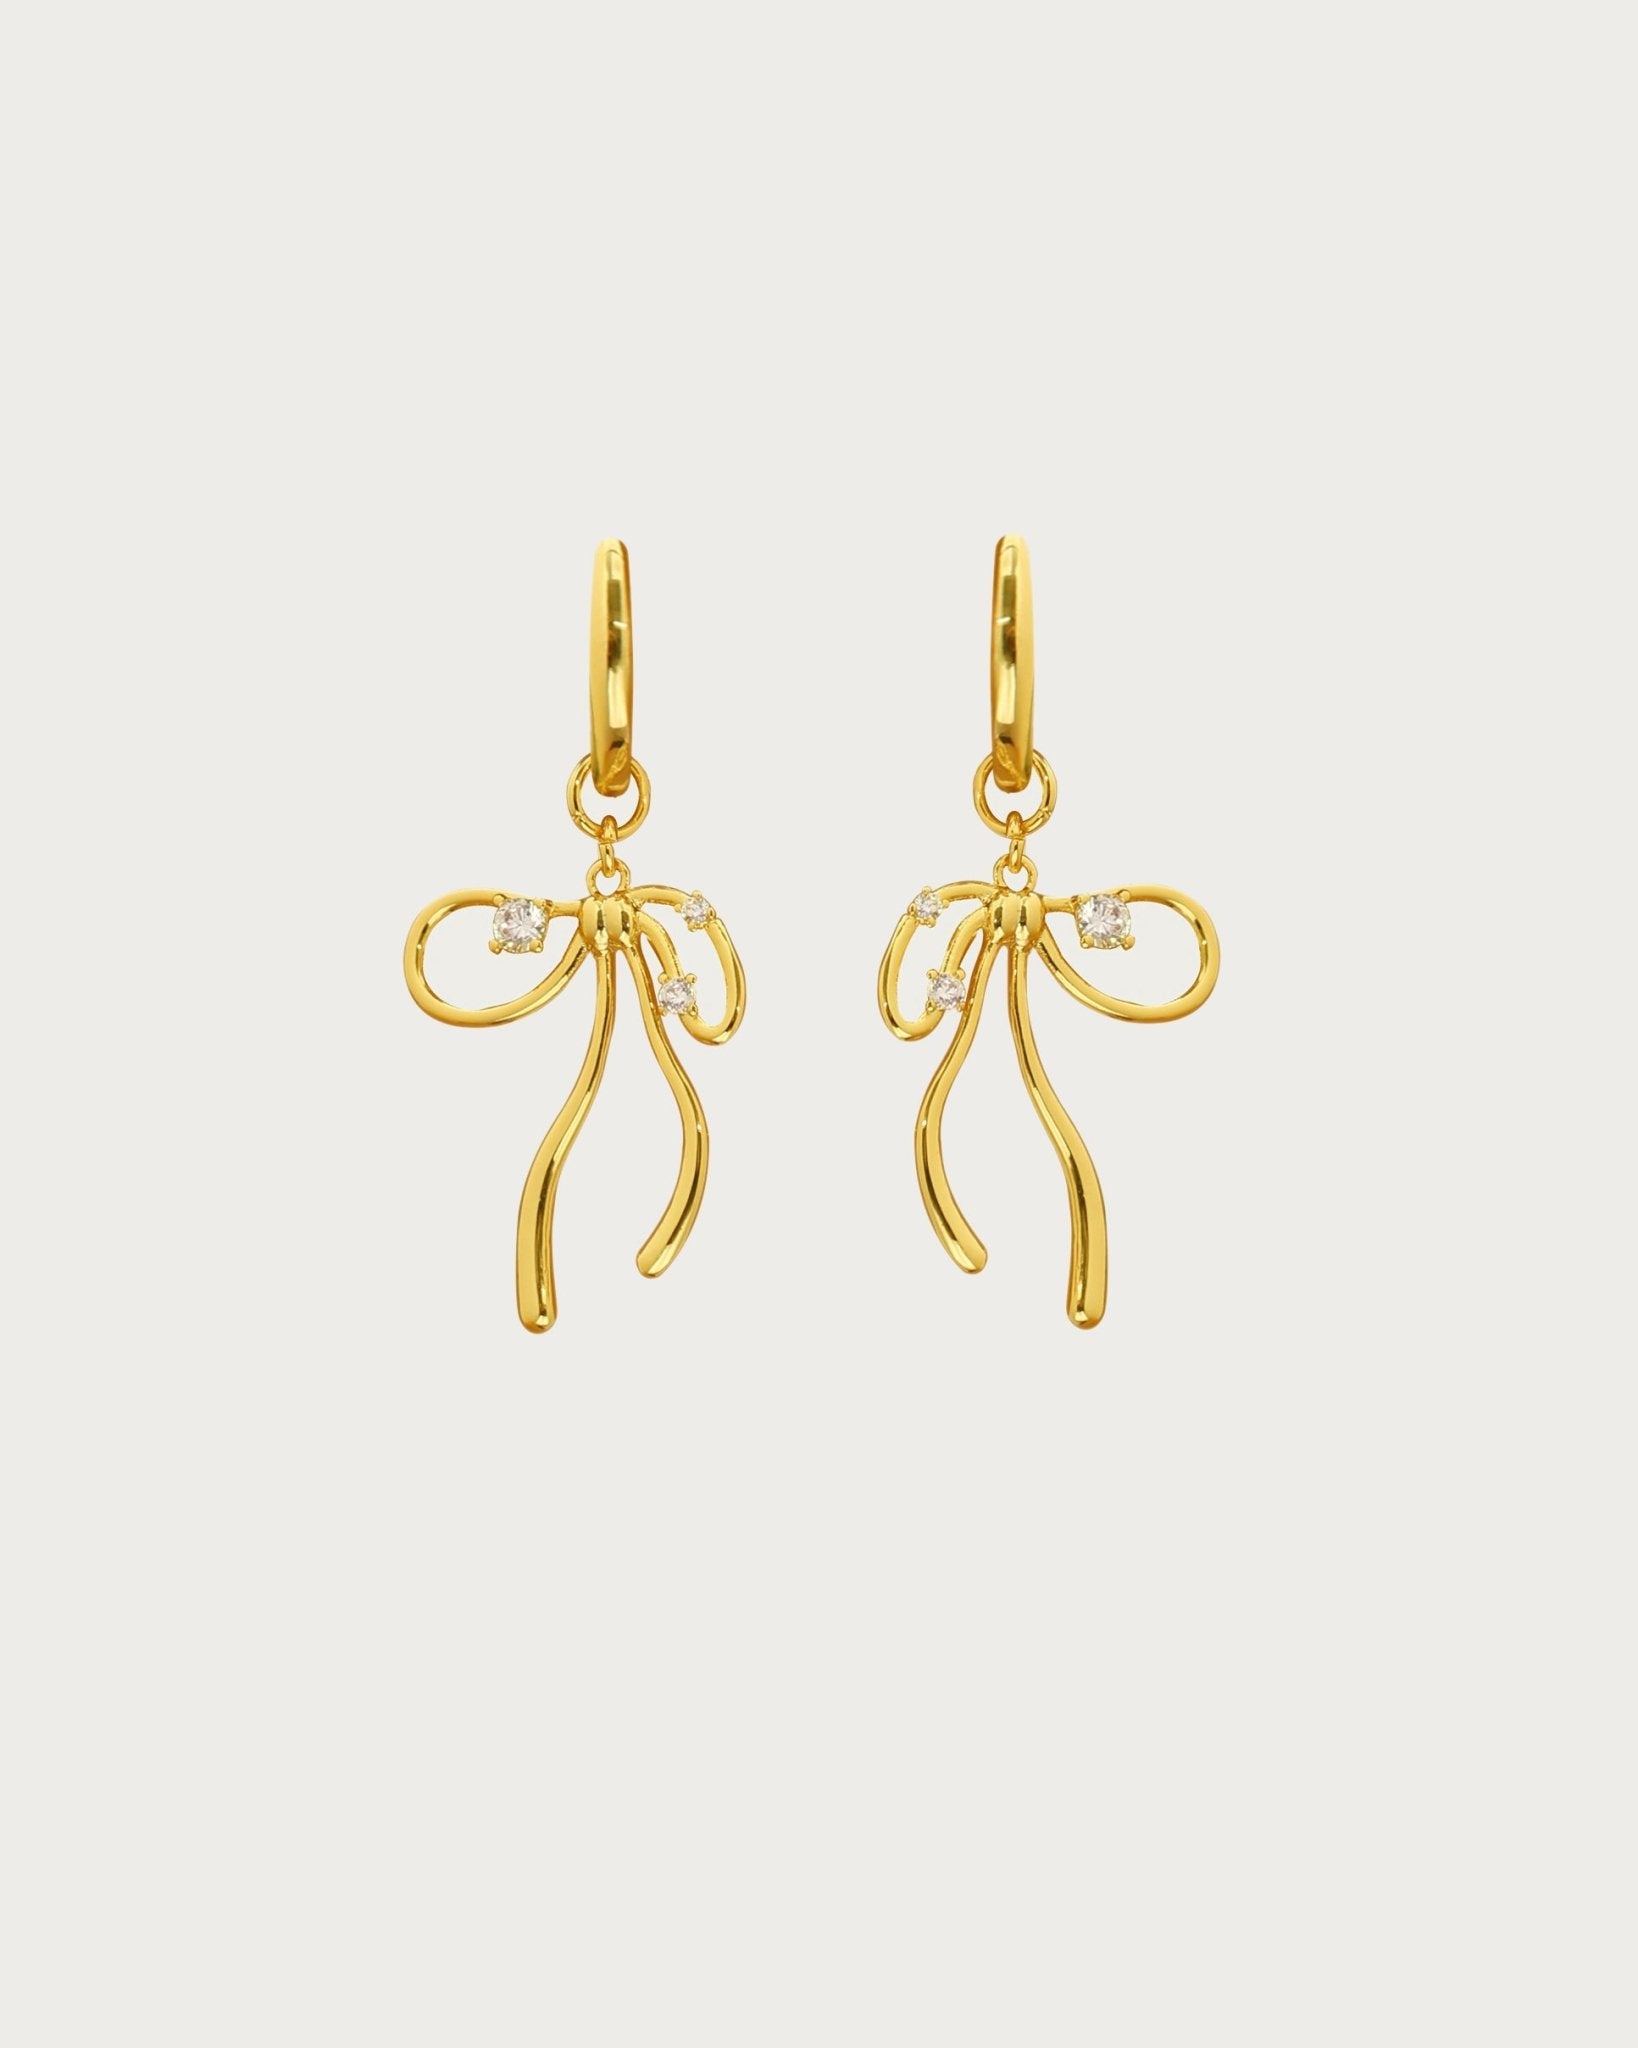 The Bow Earrings in Gold